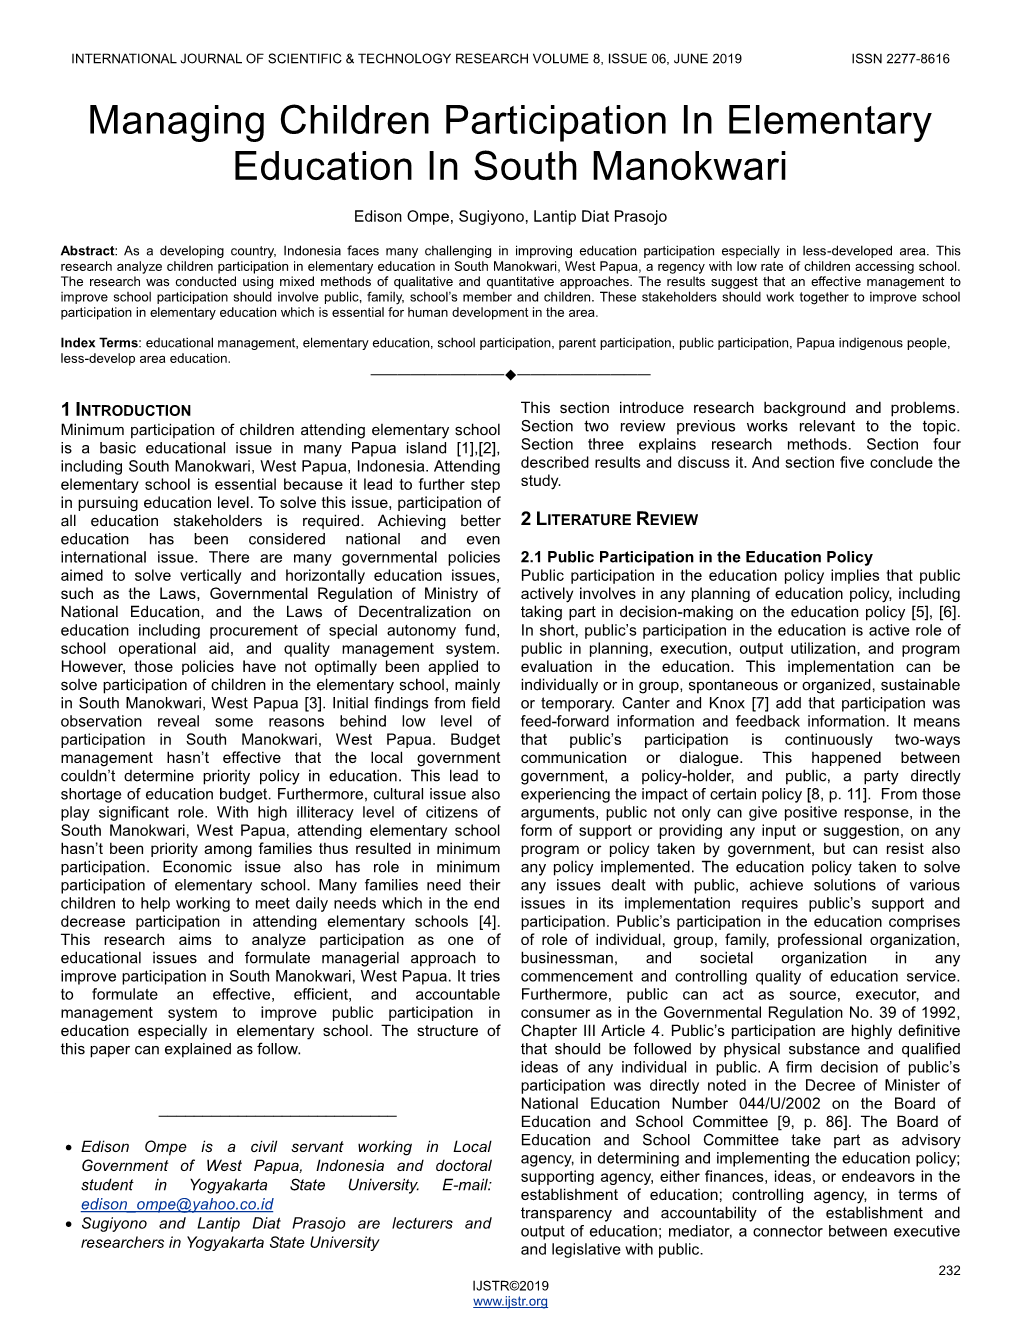 Managing Children Participation in Elementary Education in South Manokwari